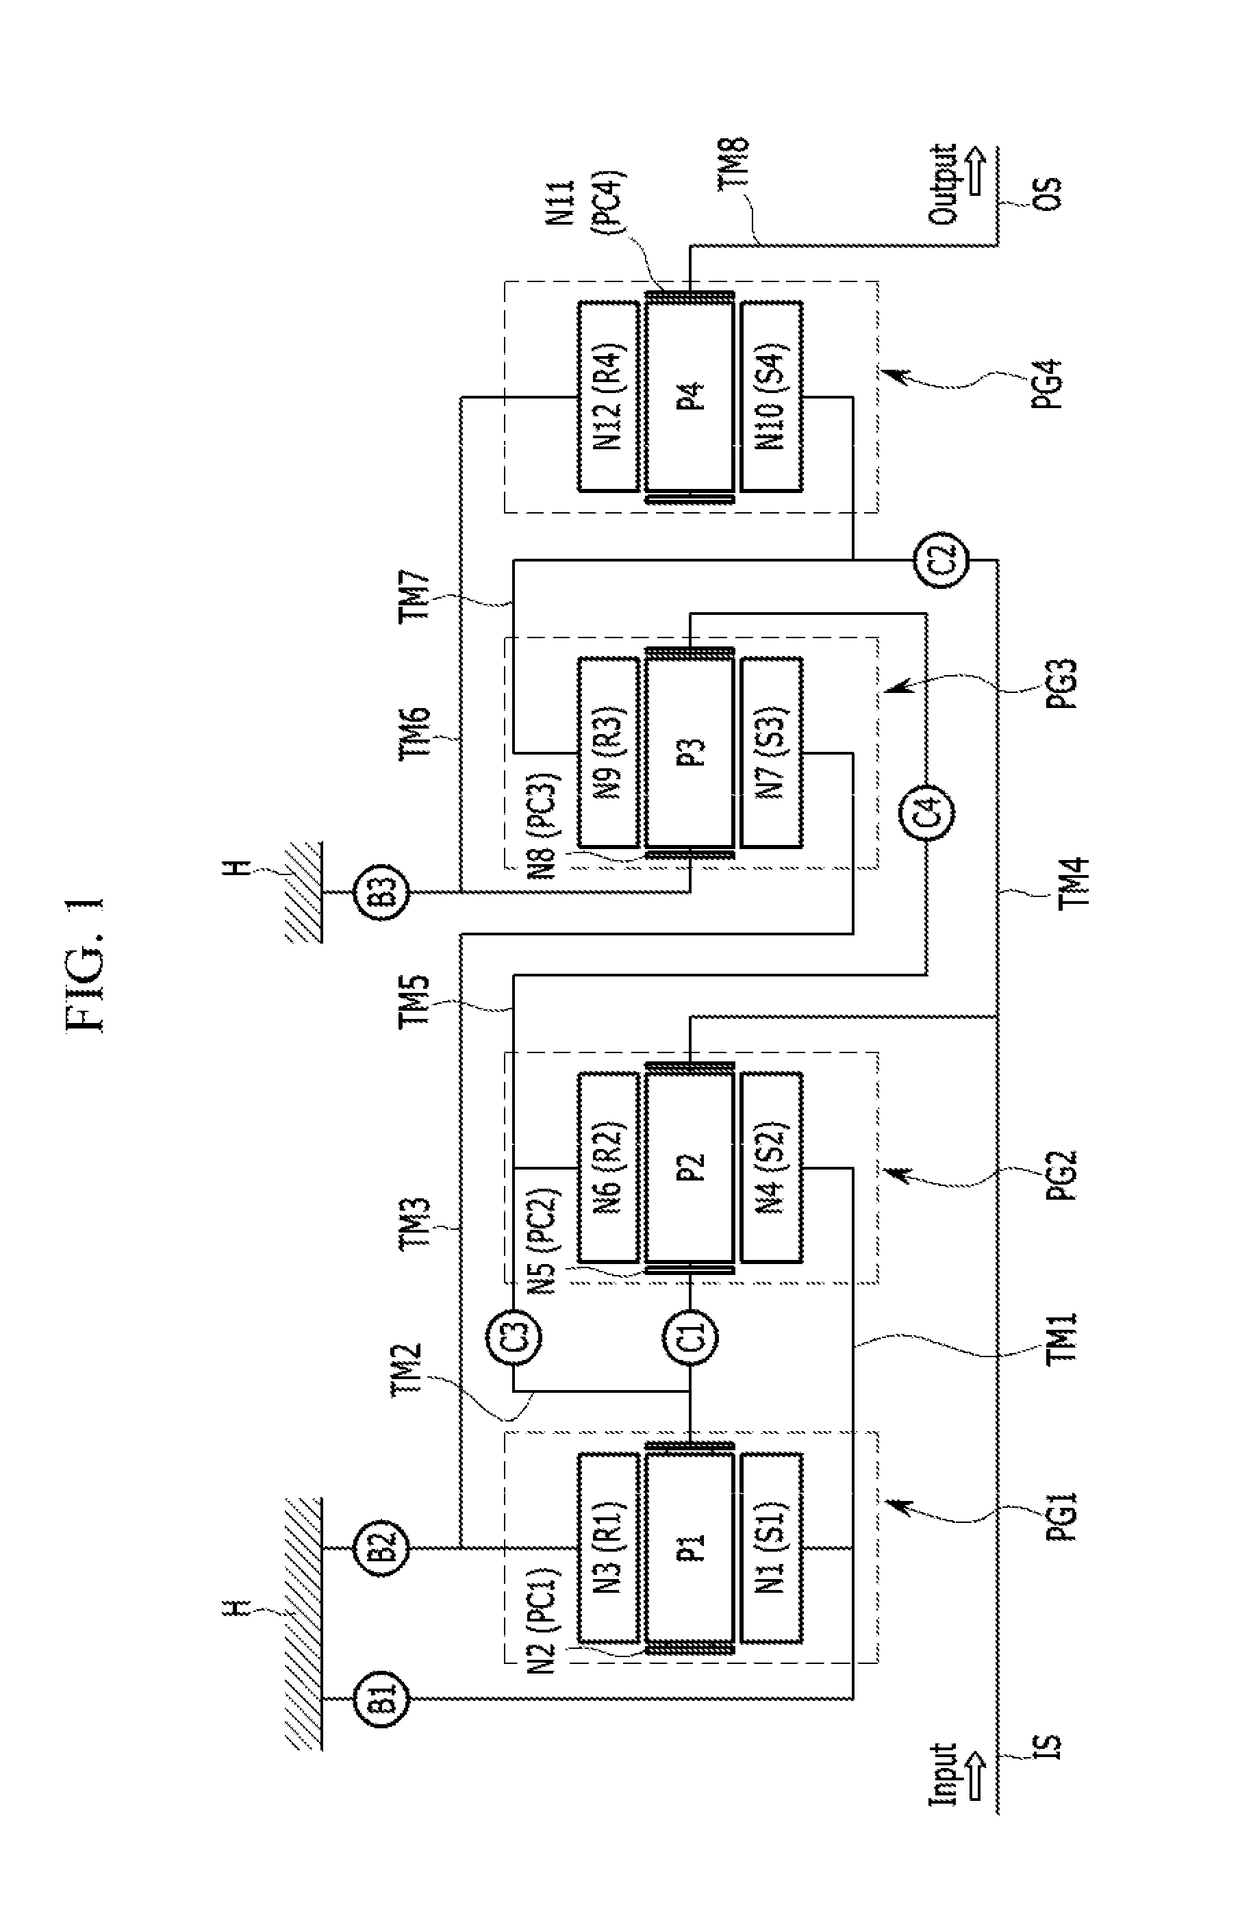 Planetary gear train of an automatic transmission for vehicles